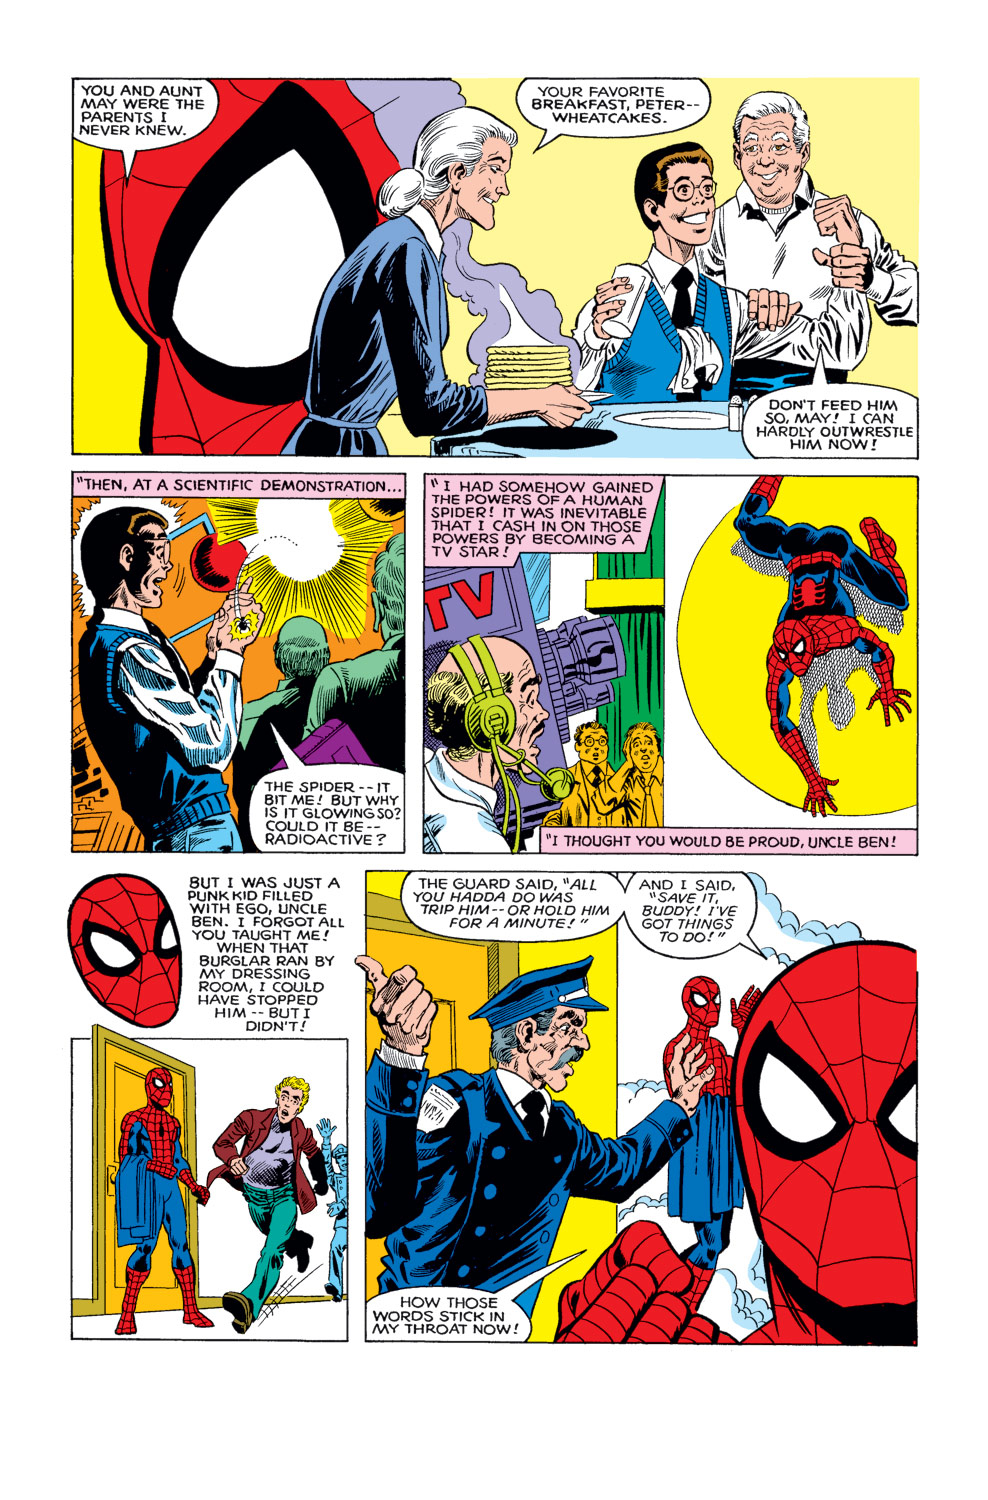 What If? (1977) issue 19 - Spider-Man had never become a crimefighter - Page 3